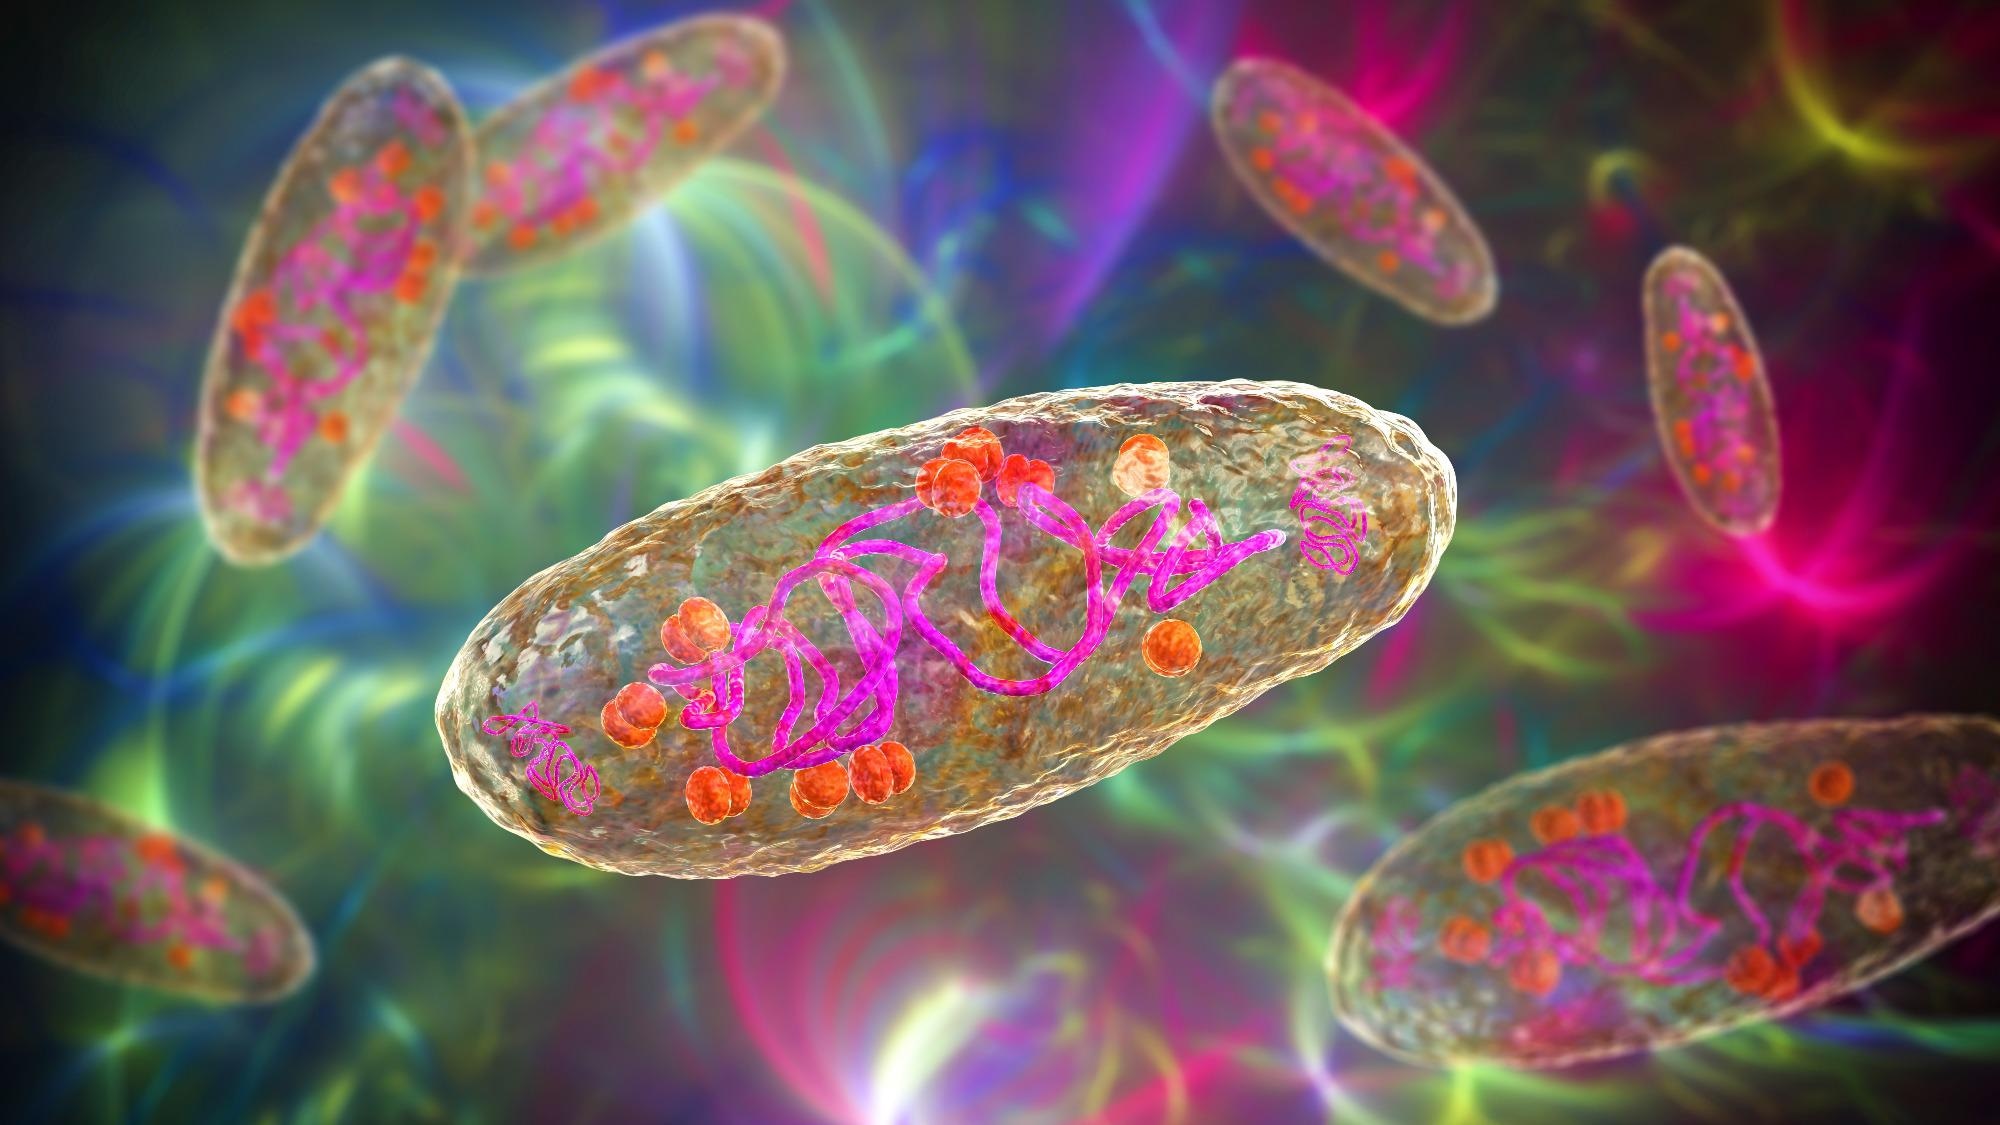 Plague bacterium Yersinia pestis, scientifically accurate 3D illustration showing a structure of the cell with DNA, plasmids and ribosomes. Image Credit: Kateryna Kon / Shutterstock